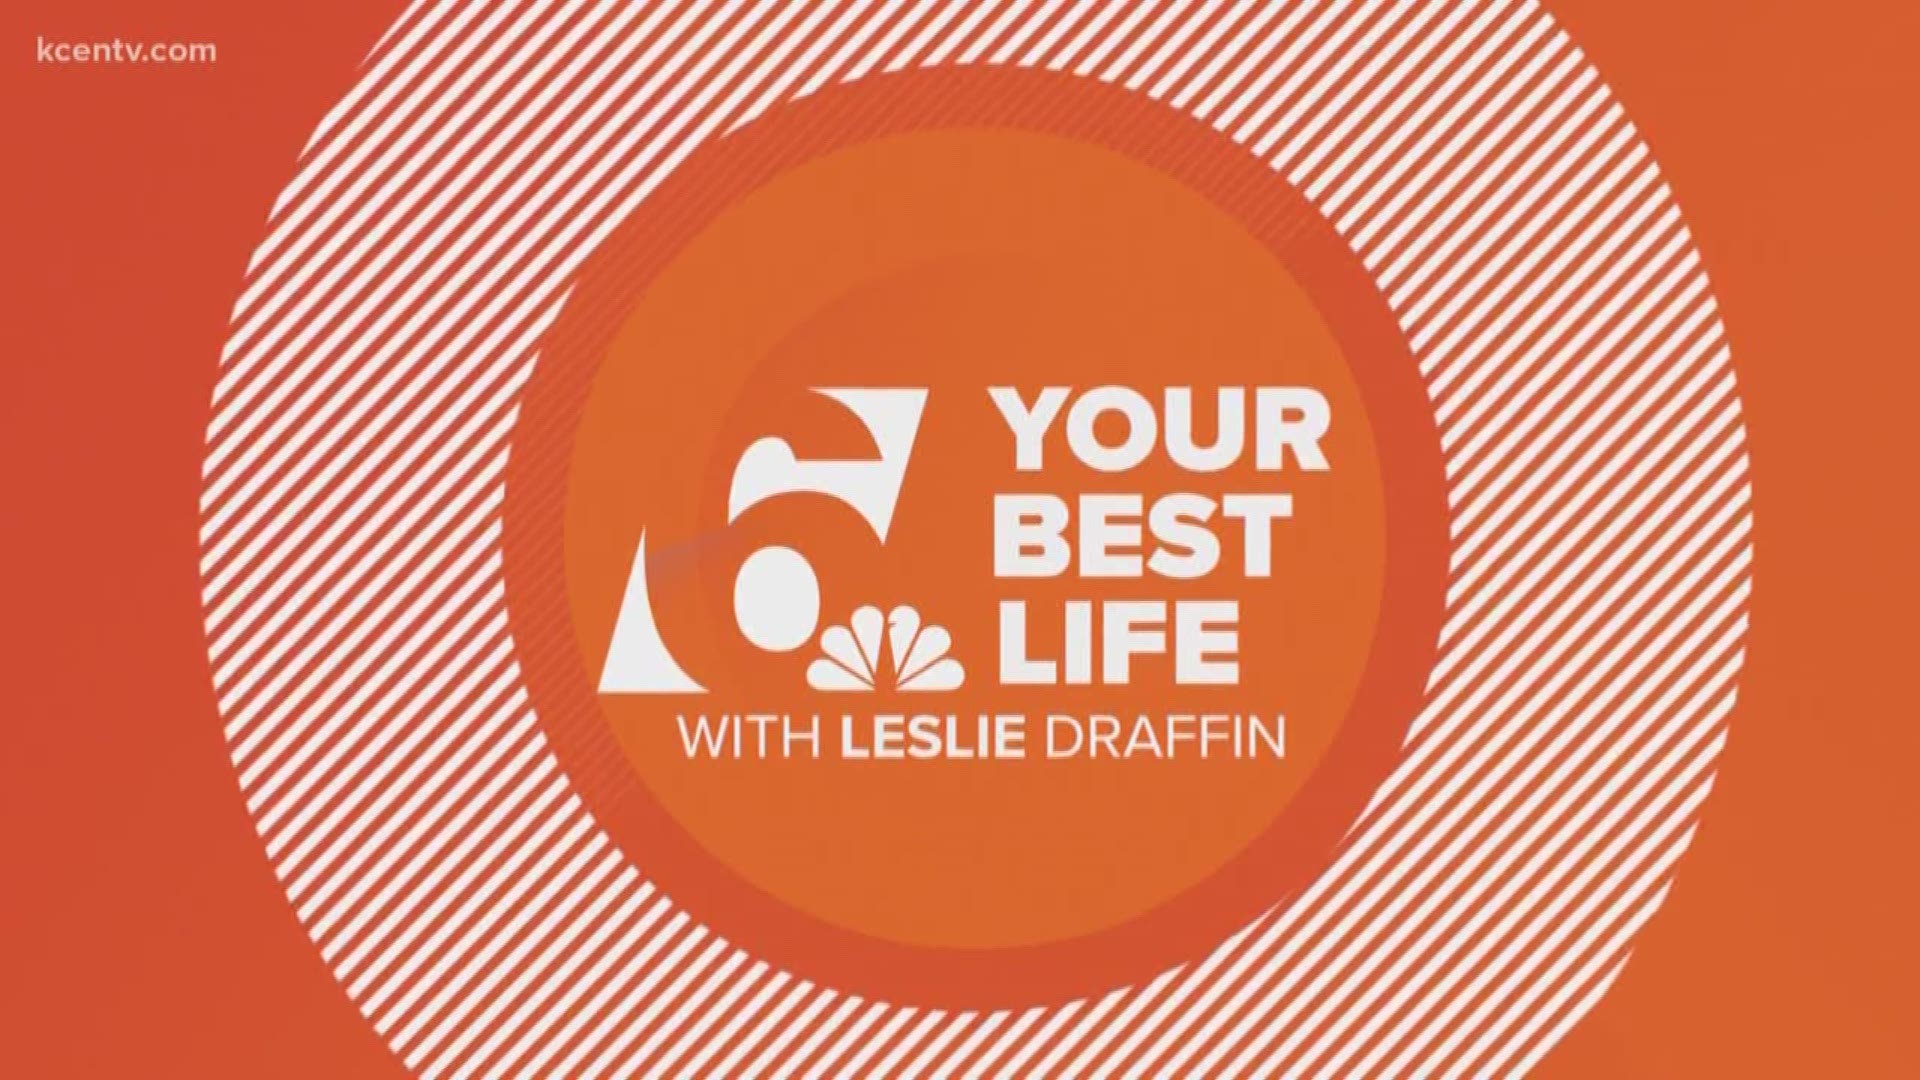 In this week’s “Your Best Life” 6 News Anchor Leslie Draffin sat down with a Belton family who is navigating the world of gaming by setting good boundaries.